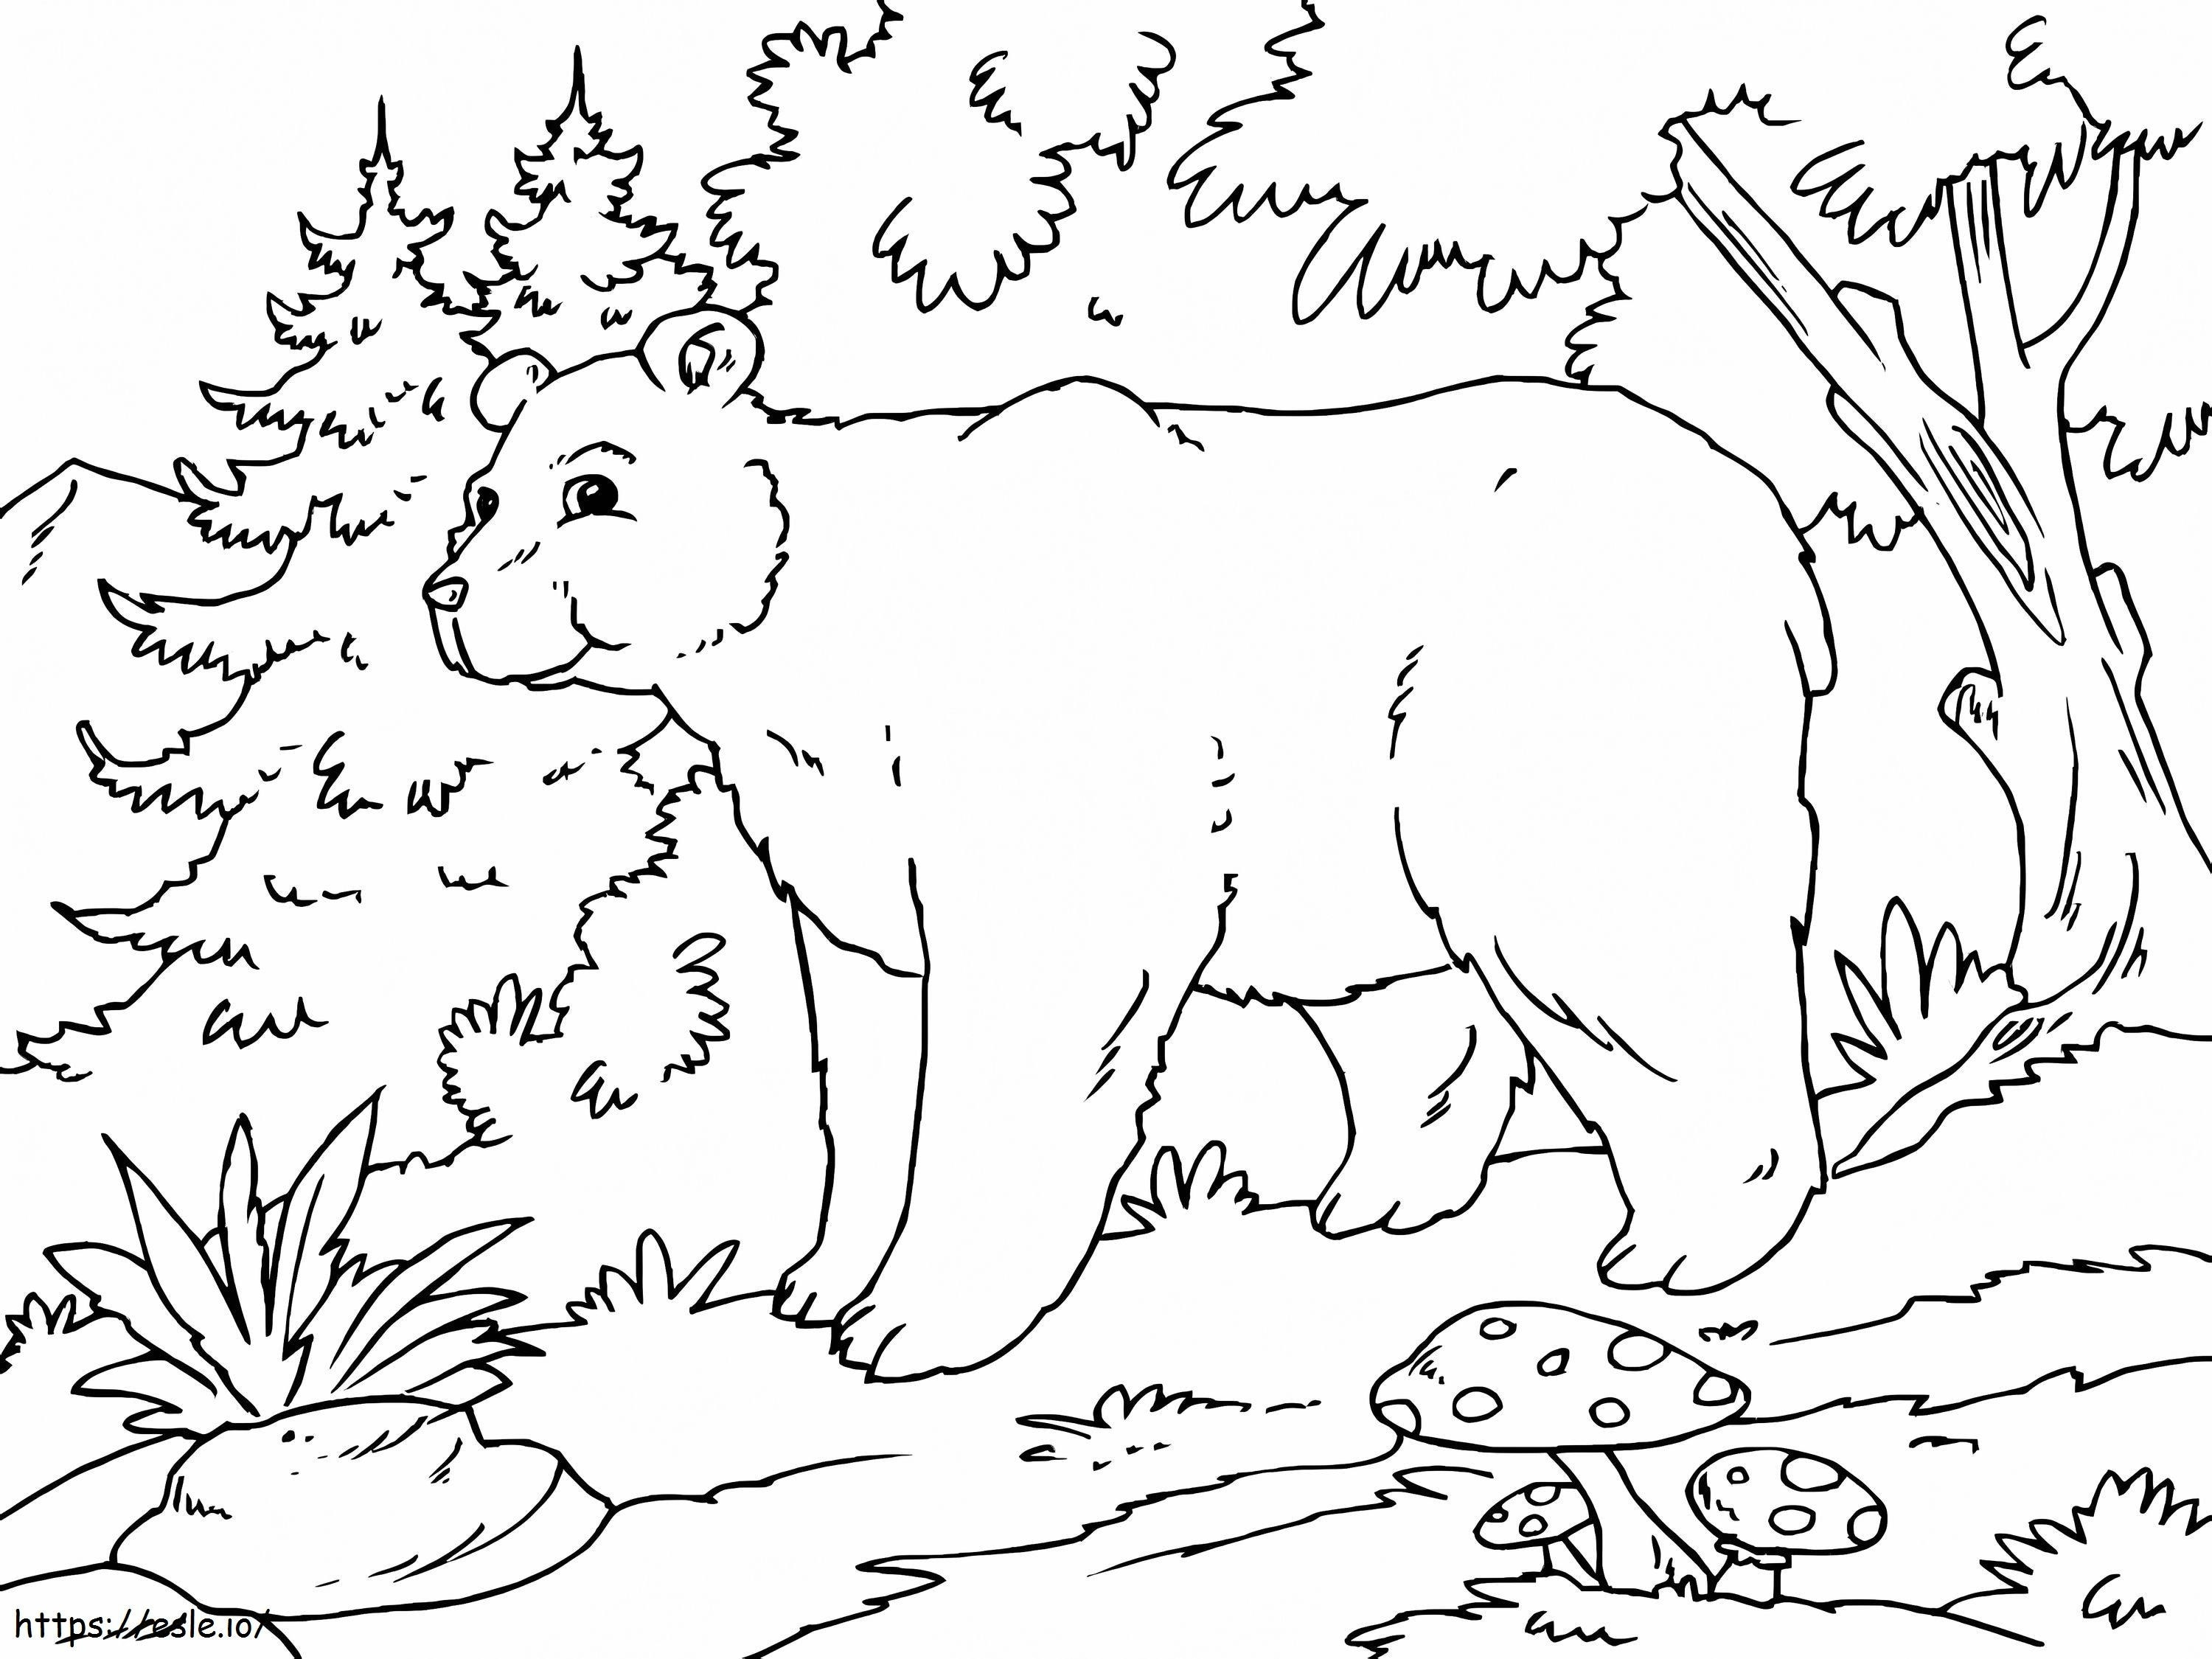 Alpine Bear coloring page